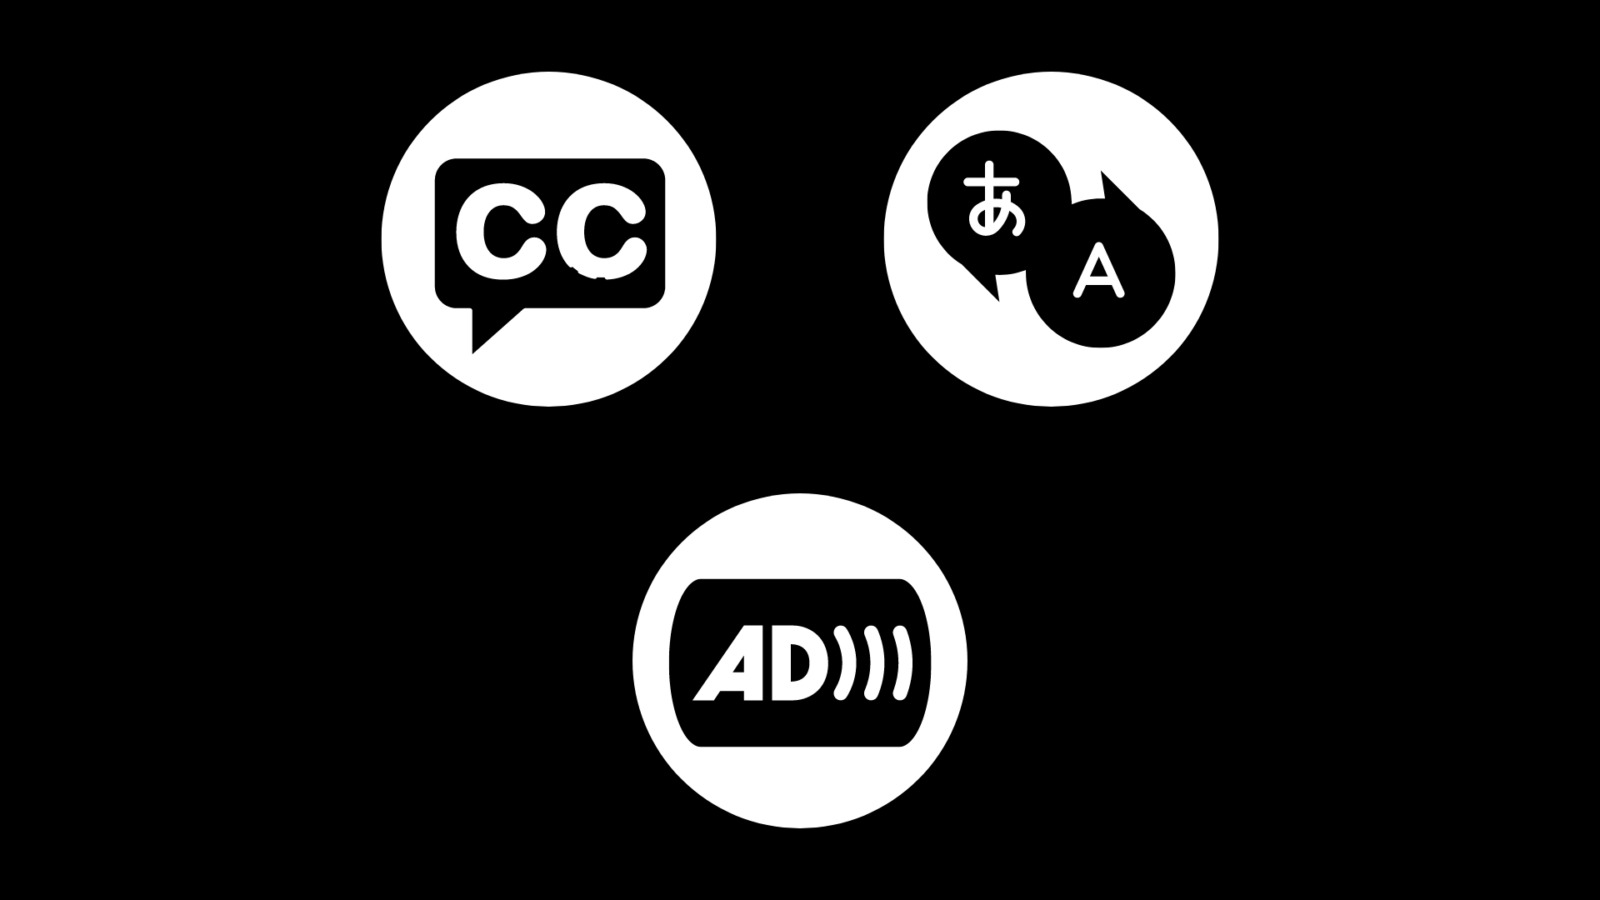 icons for closed captioning, subtitles, and audio description